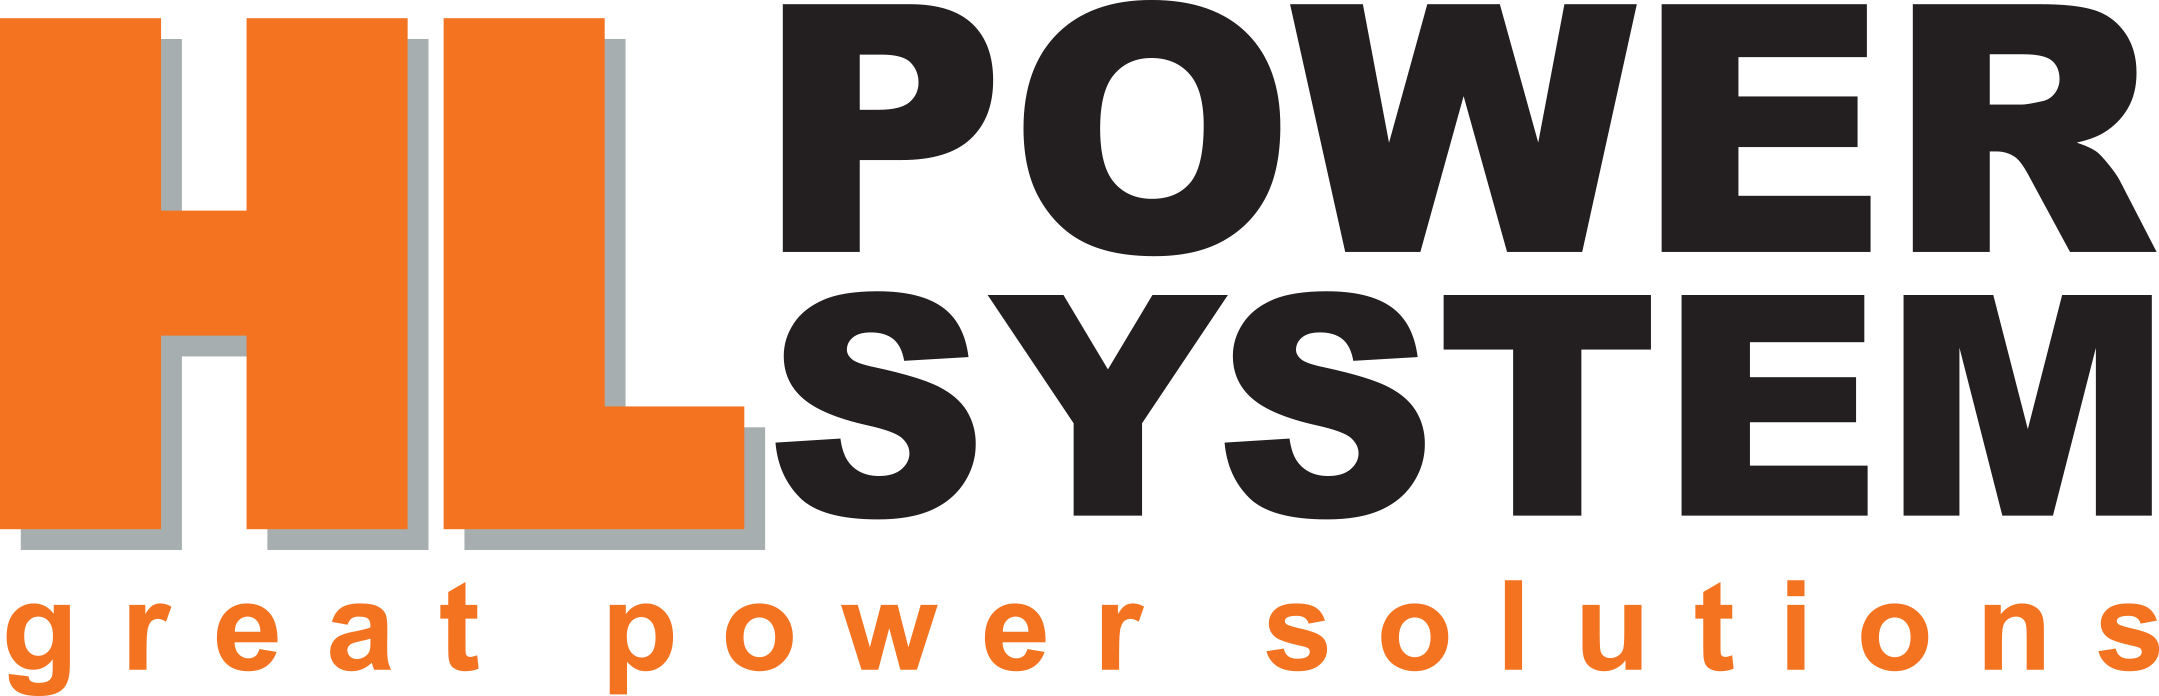 About Us HL Power Systems